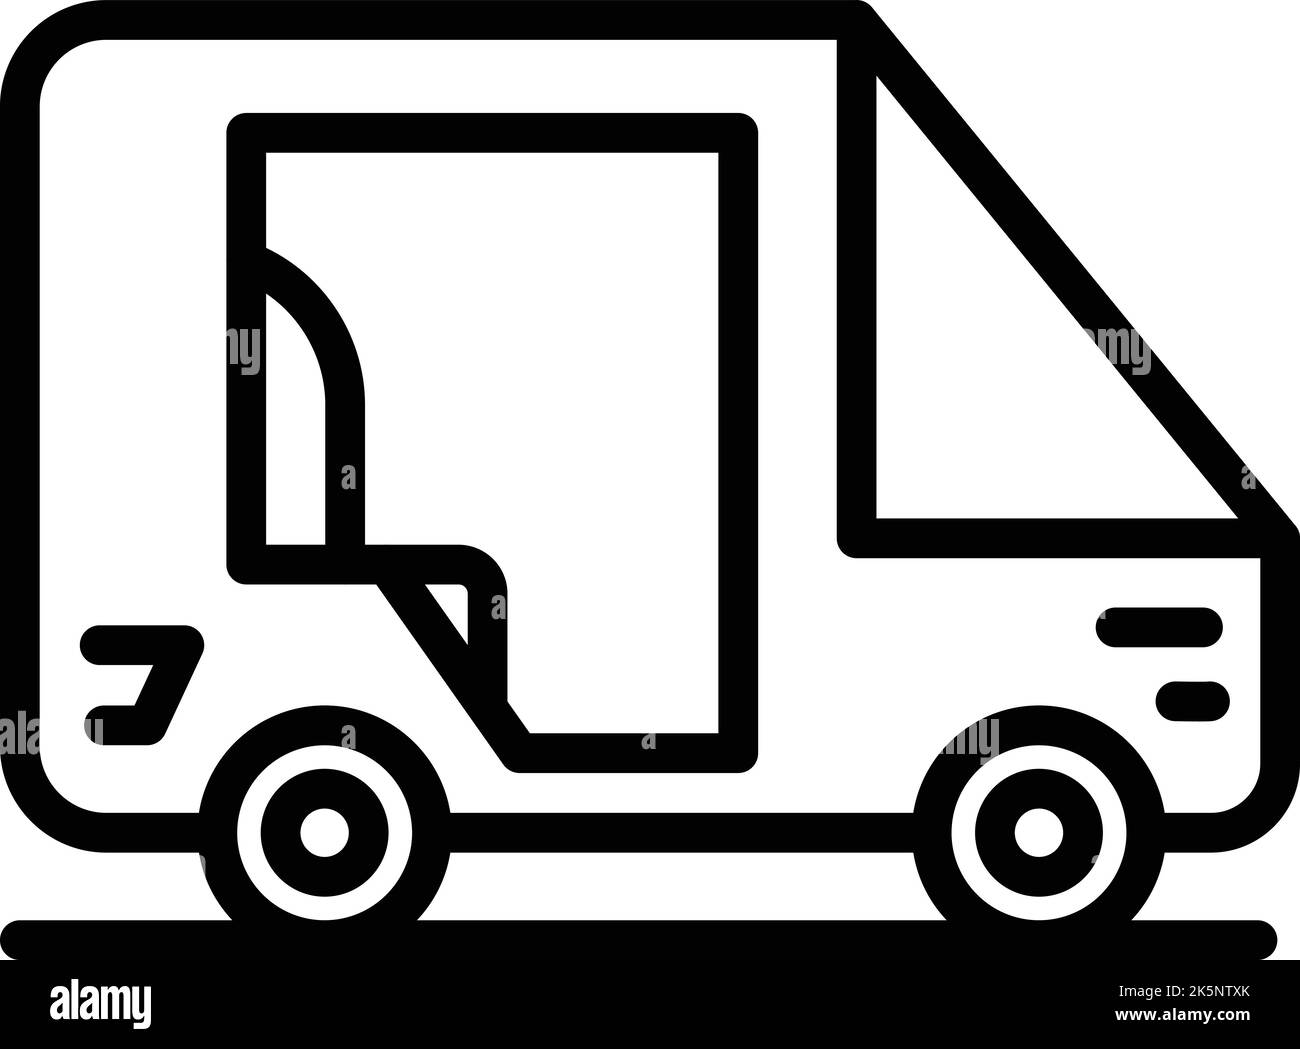 Tuk icon outline vector. Trishaw bike. Chinese carriage Stock Vector